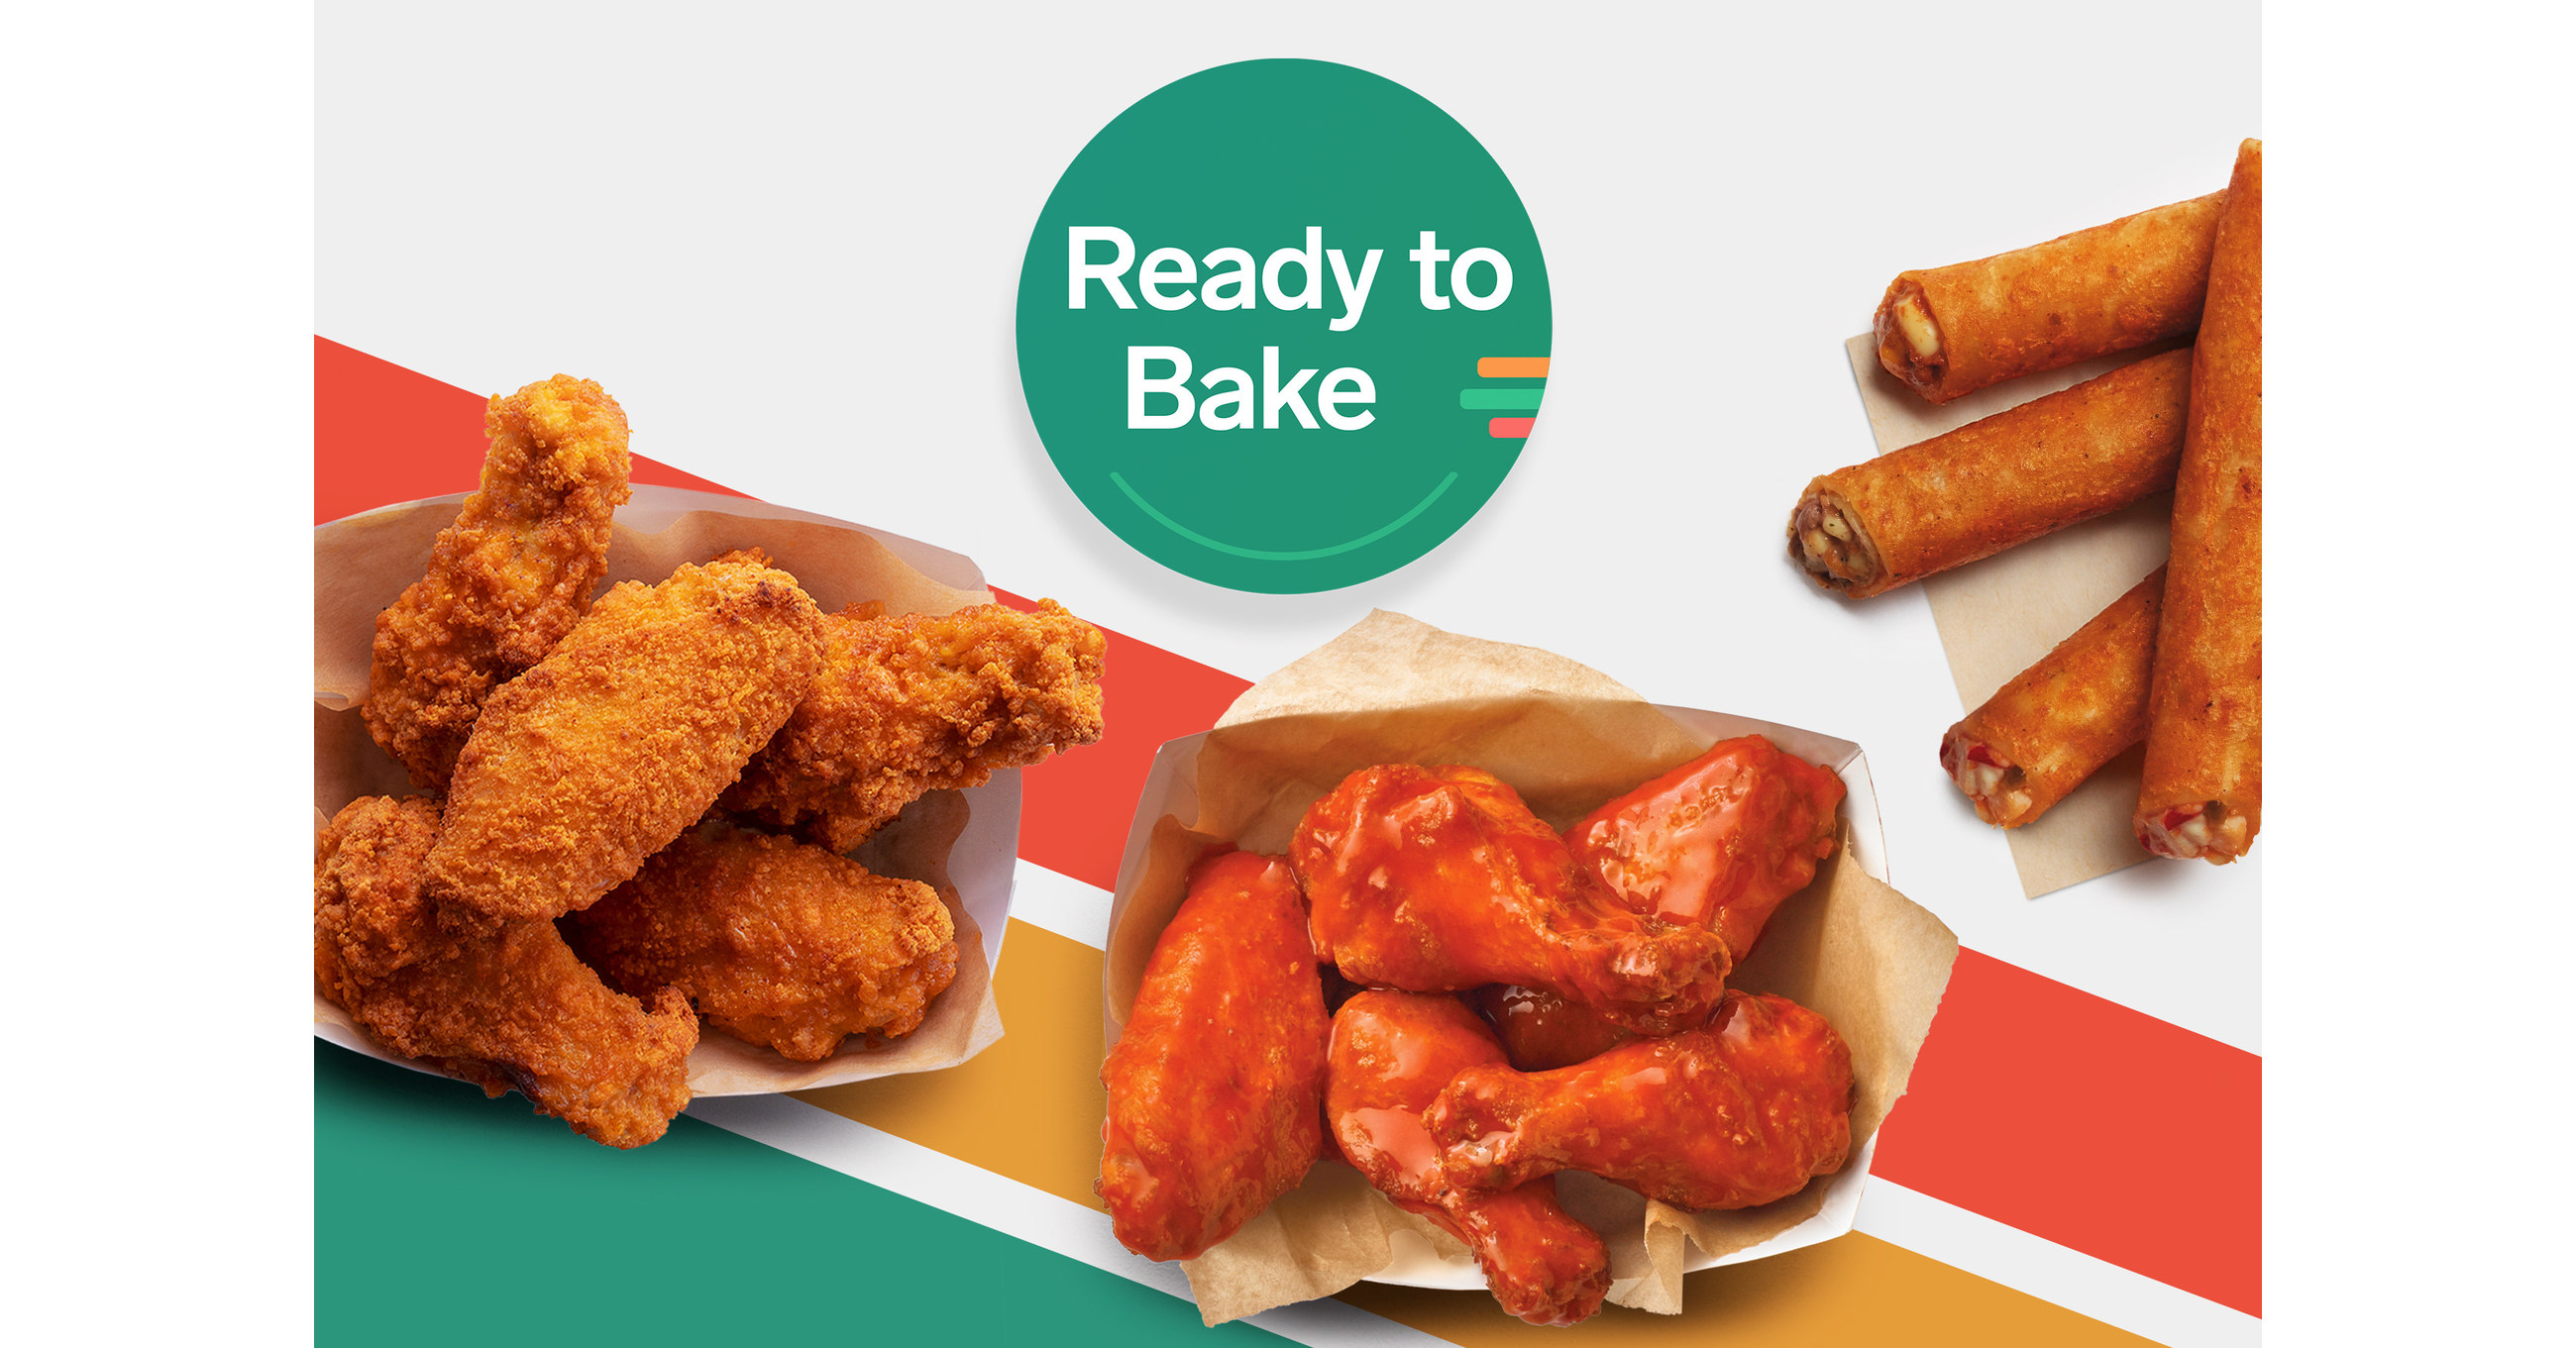 7-Eleven Expands Prepared Meals Program With 15 New Recipes